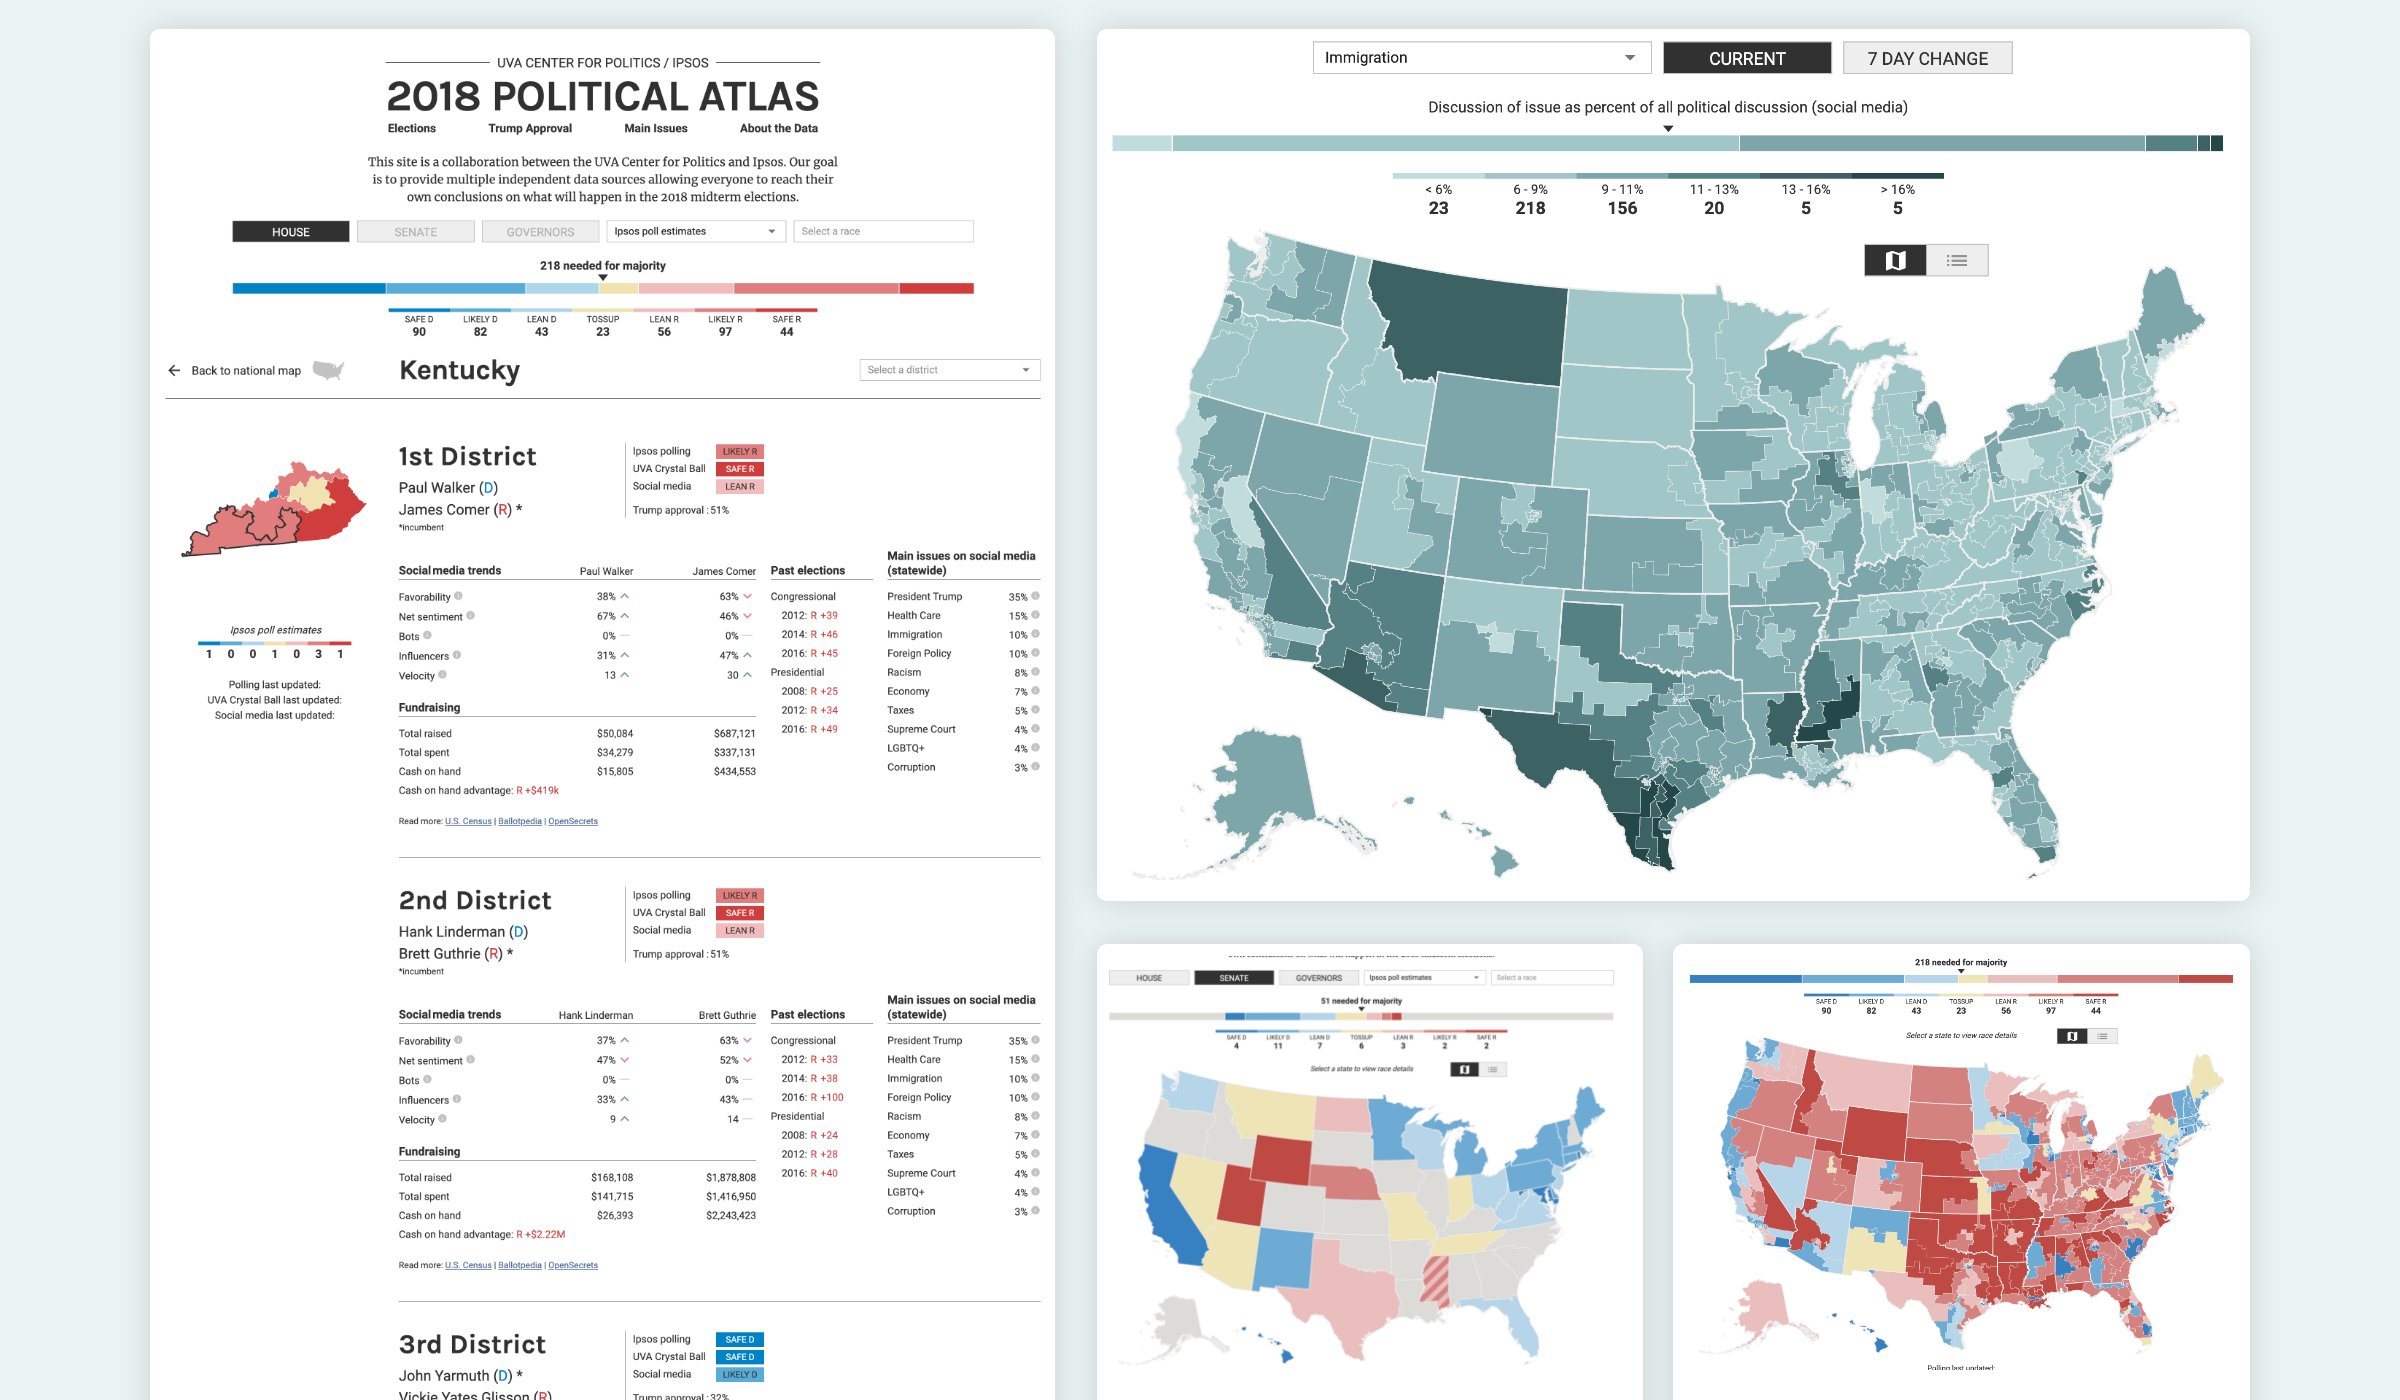 A montage of visualizations made for IPSOS by Graphicacy, for their 2018 Political Atlas